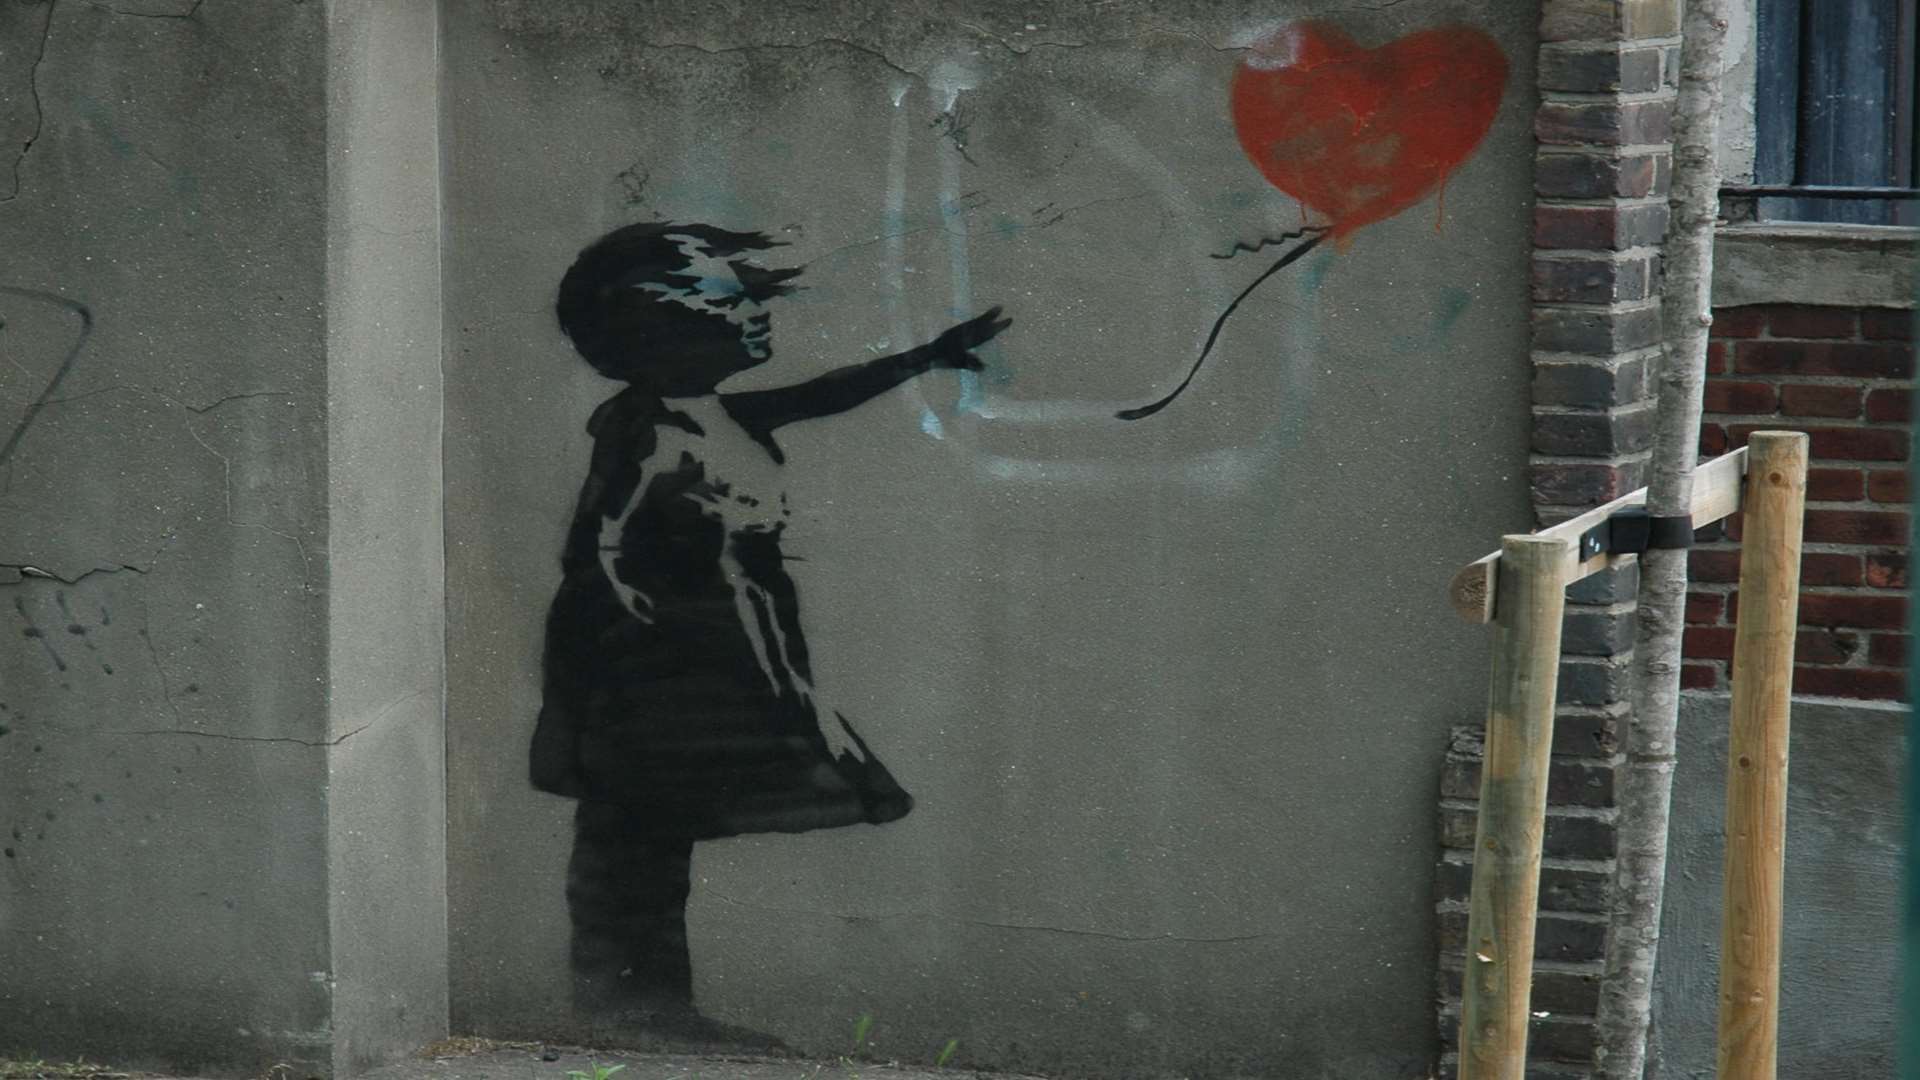 A similar work, thought to be by Banksy, on a wall in London